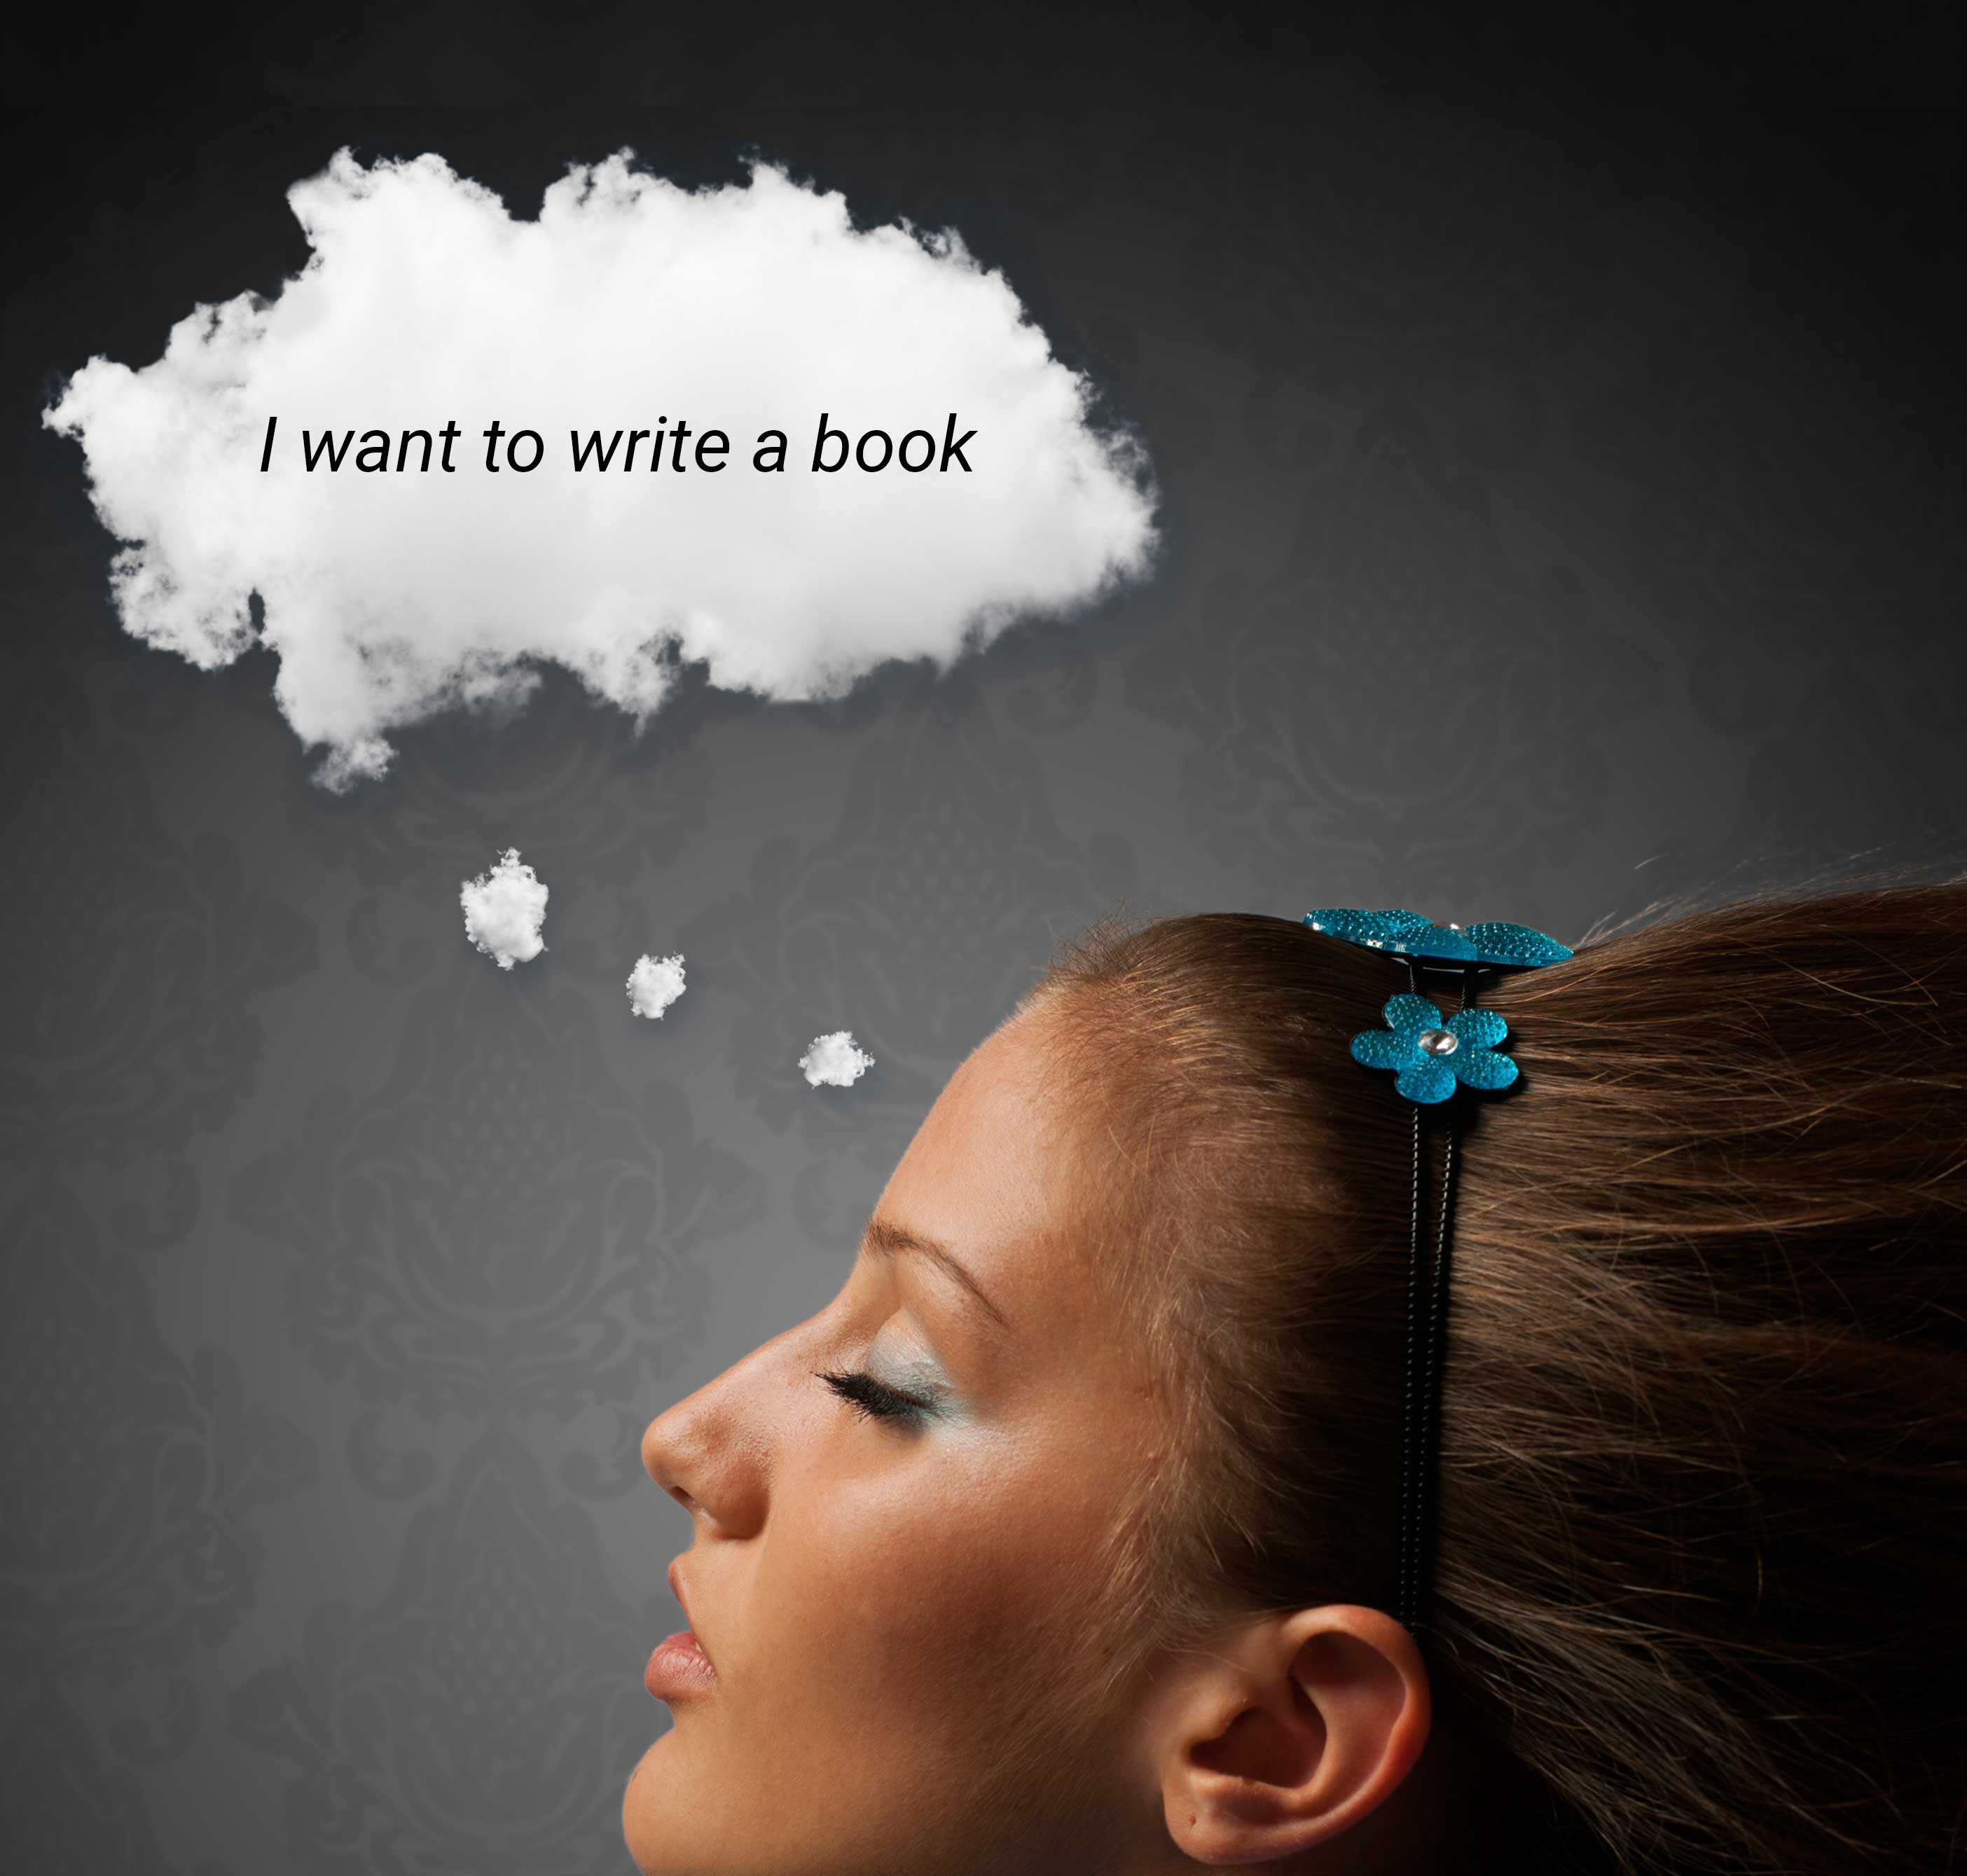 I want to write a great book